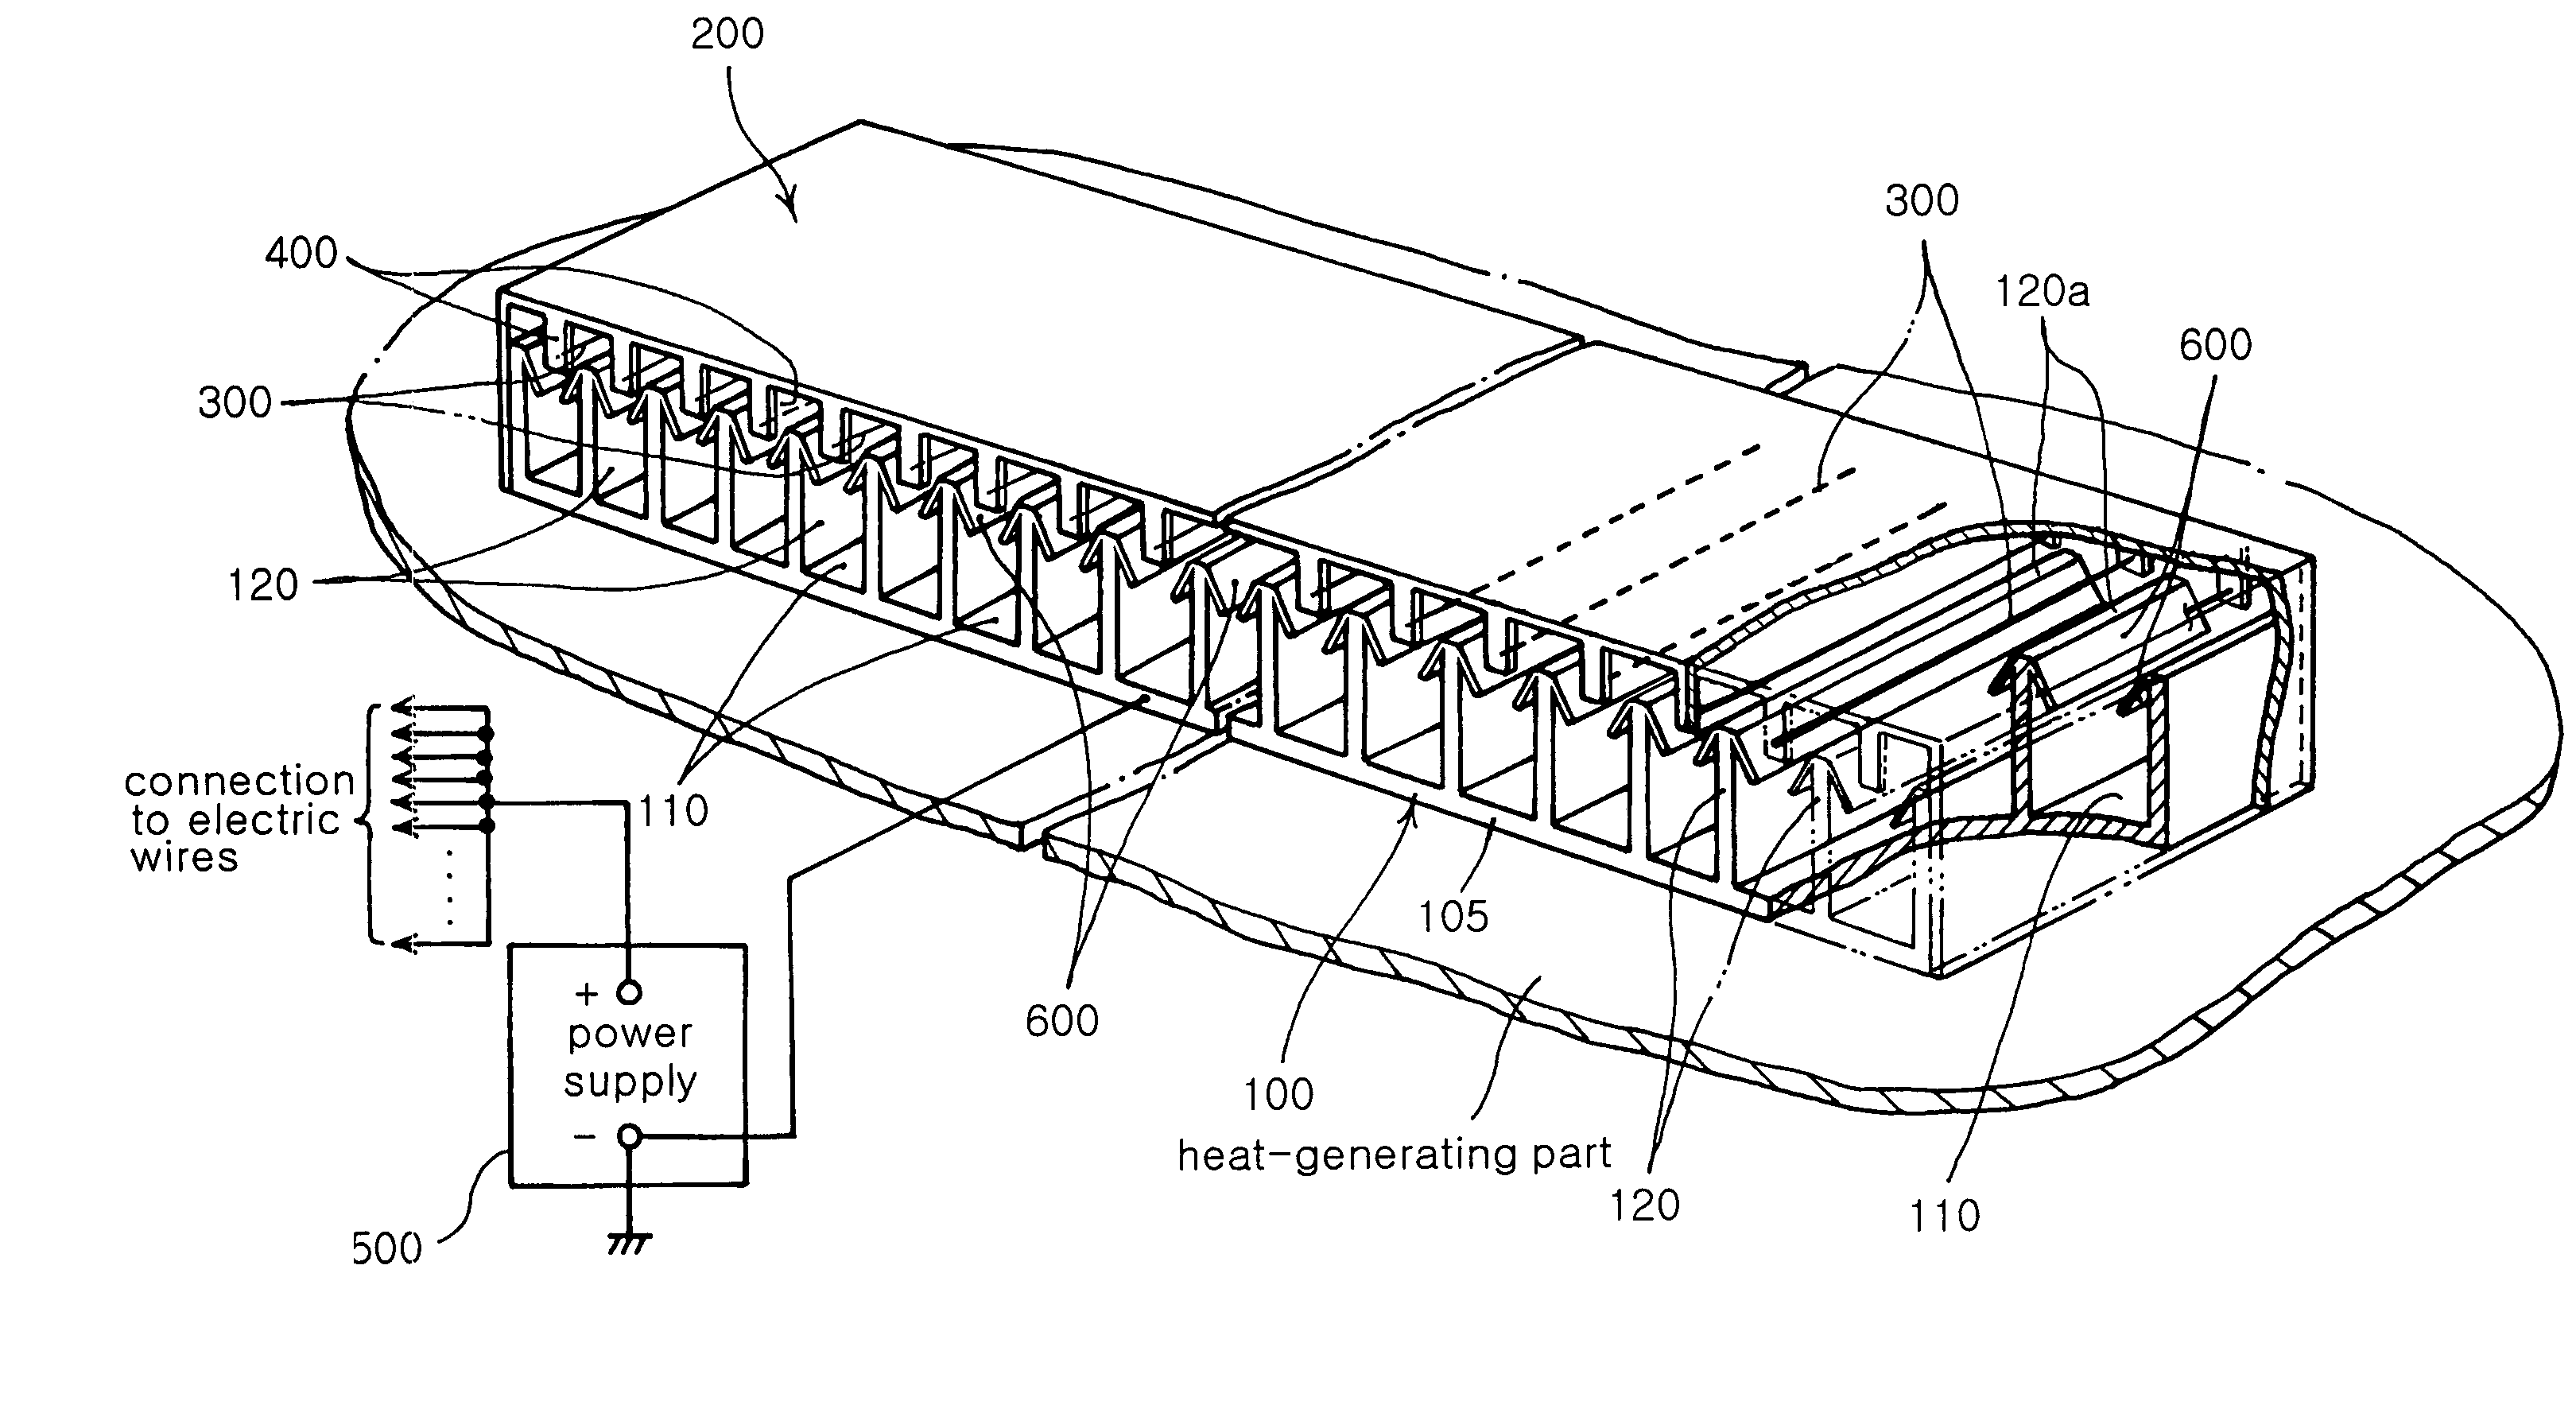 Fanless high-efficiency cooling device using ion wind